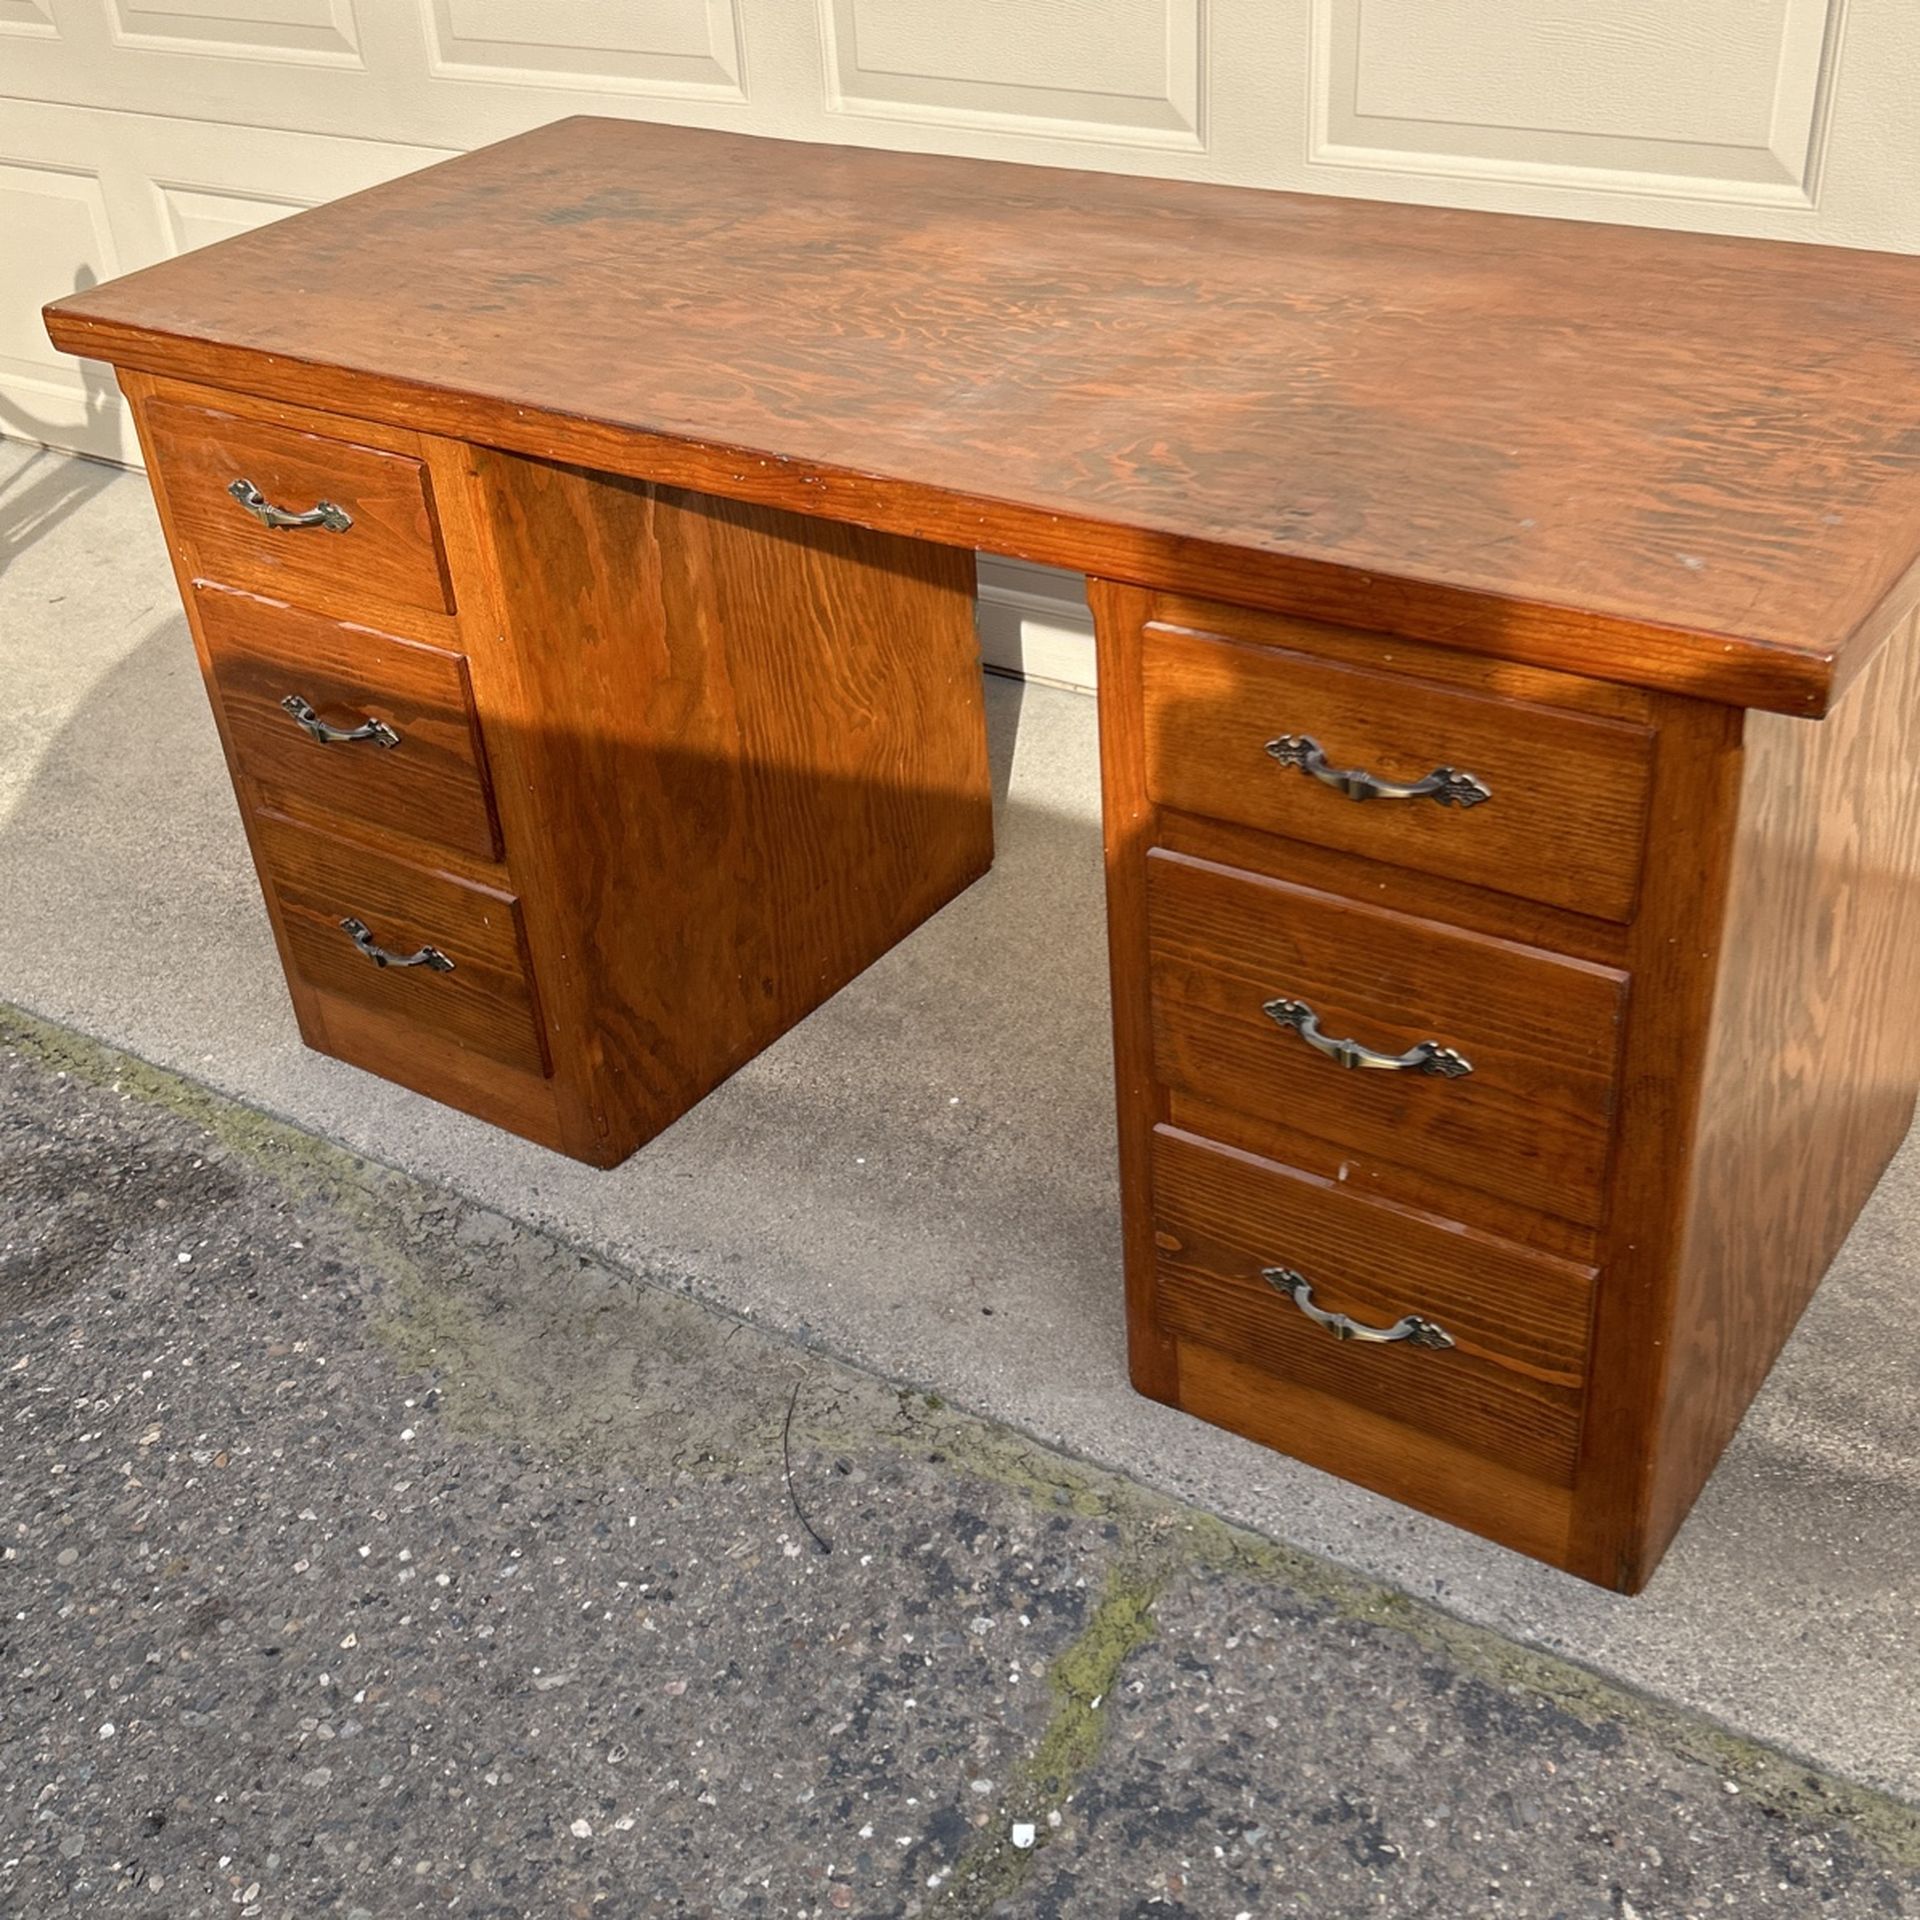 Antique Desk With Drawers 